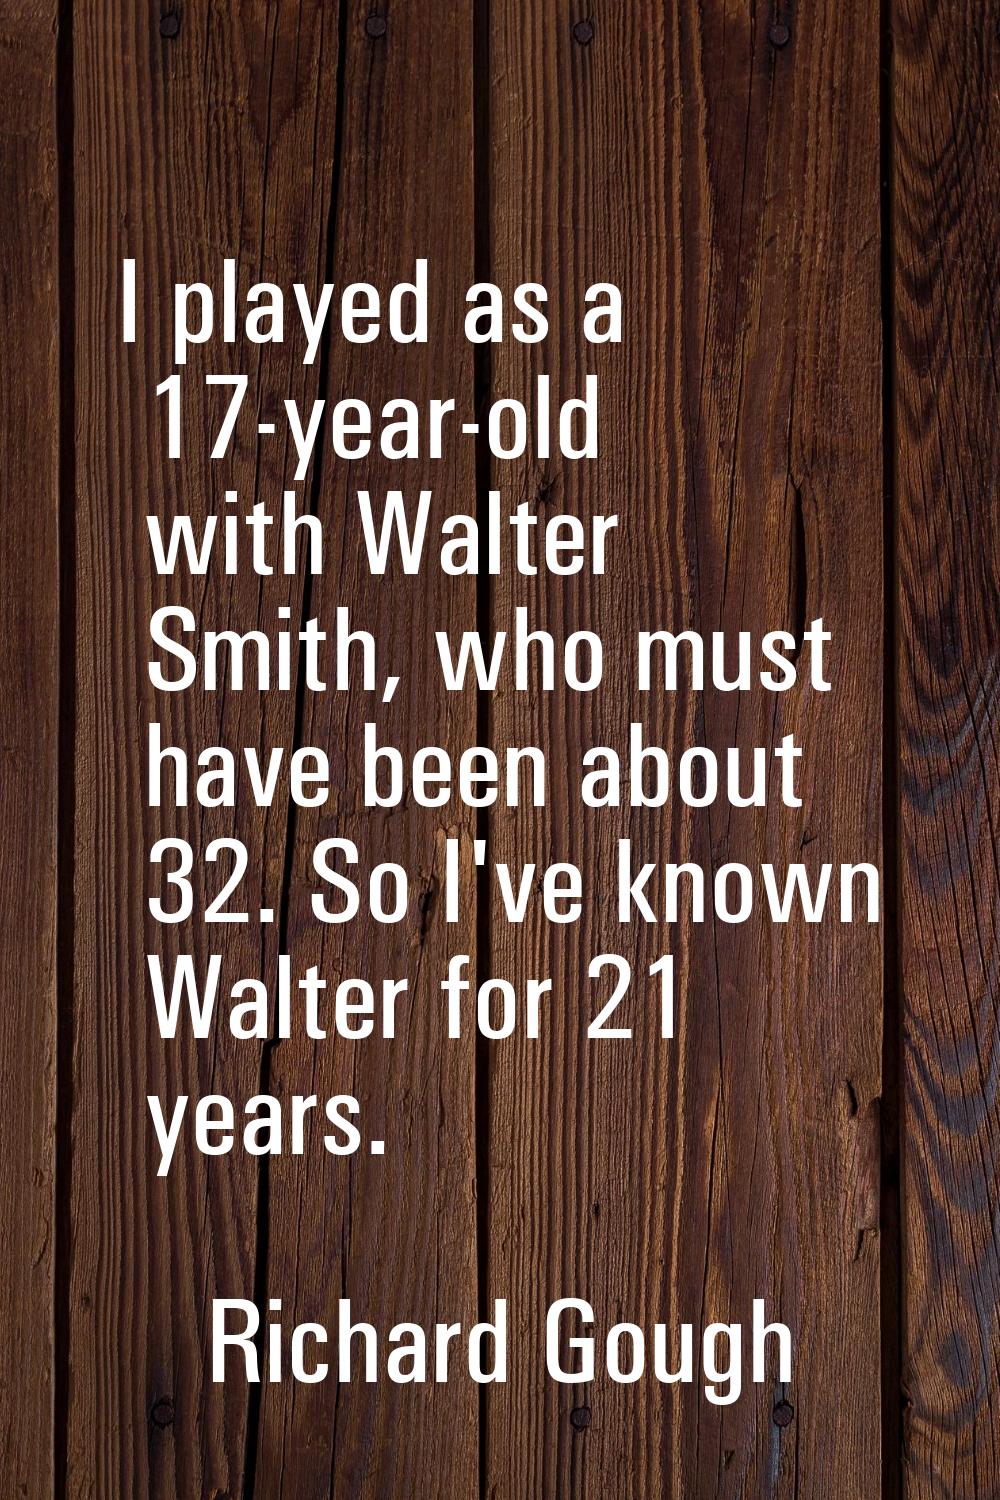 I played as a 17-year-old with Walter Smith, who must have been about 32. So I've known Walter for 